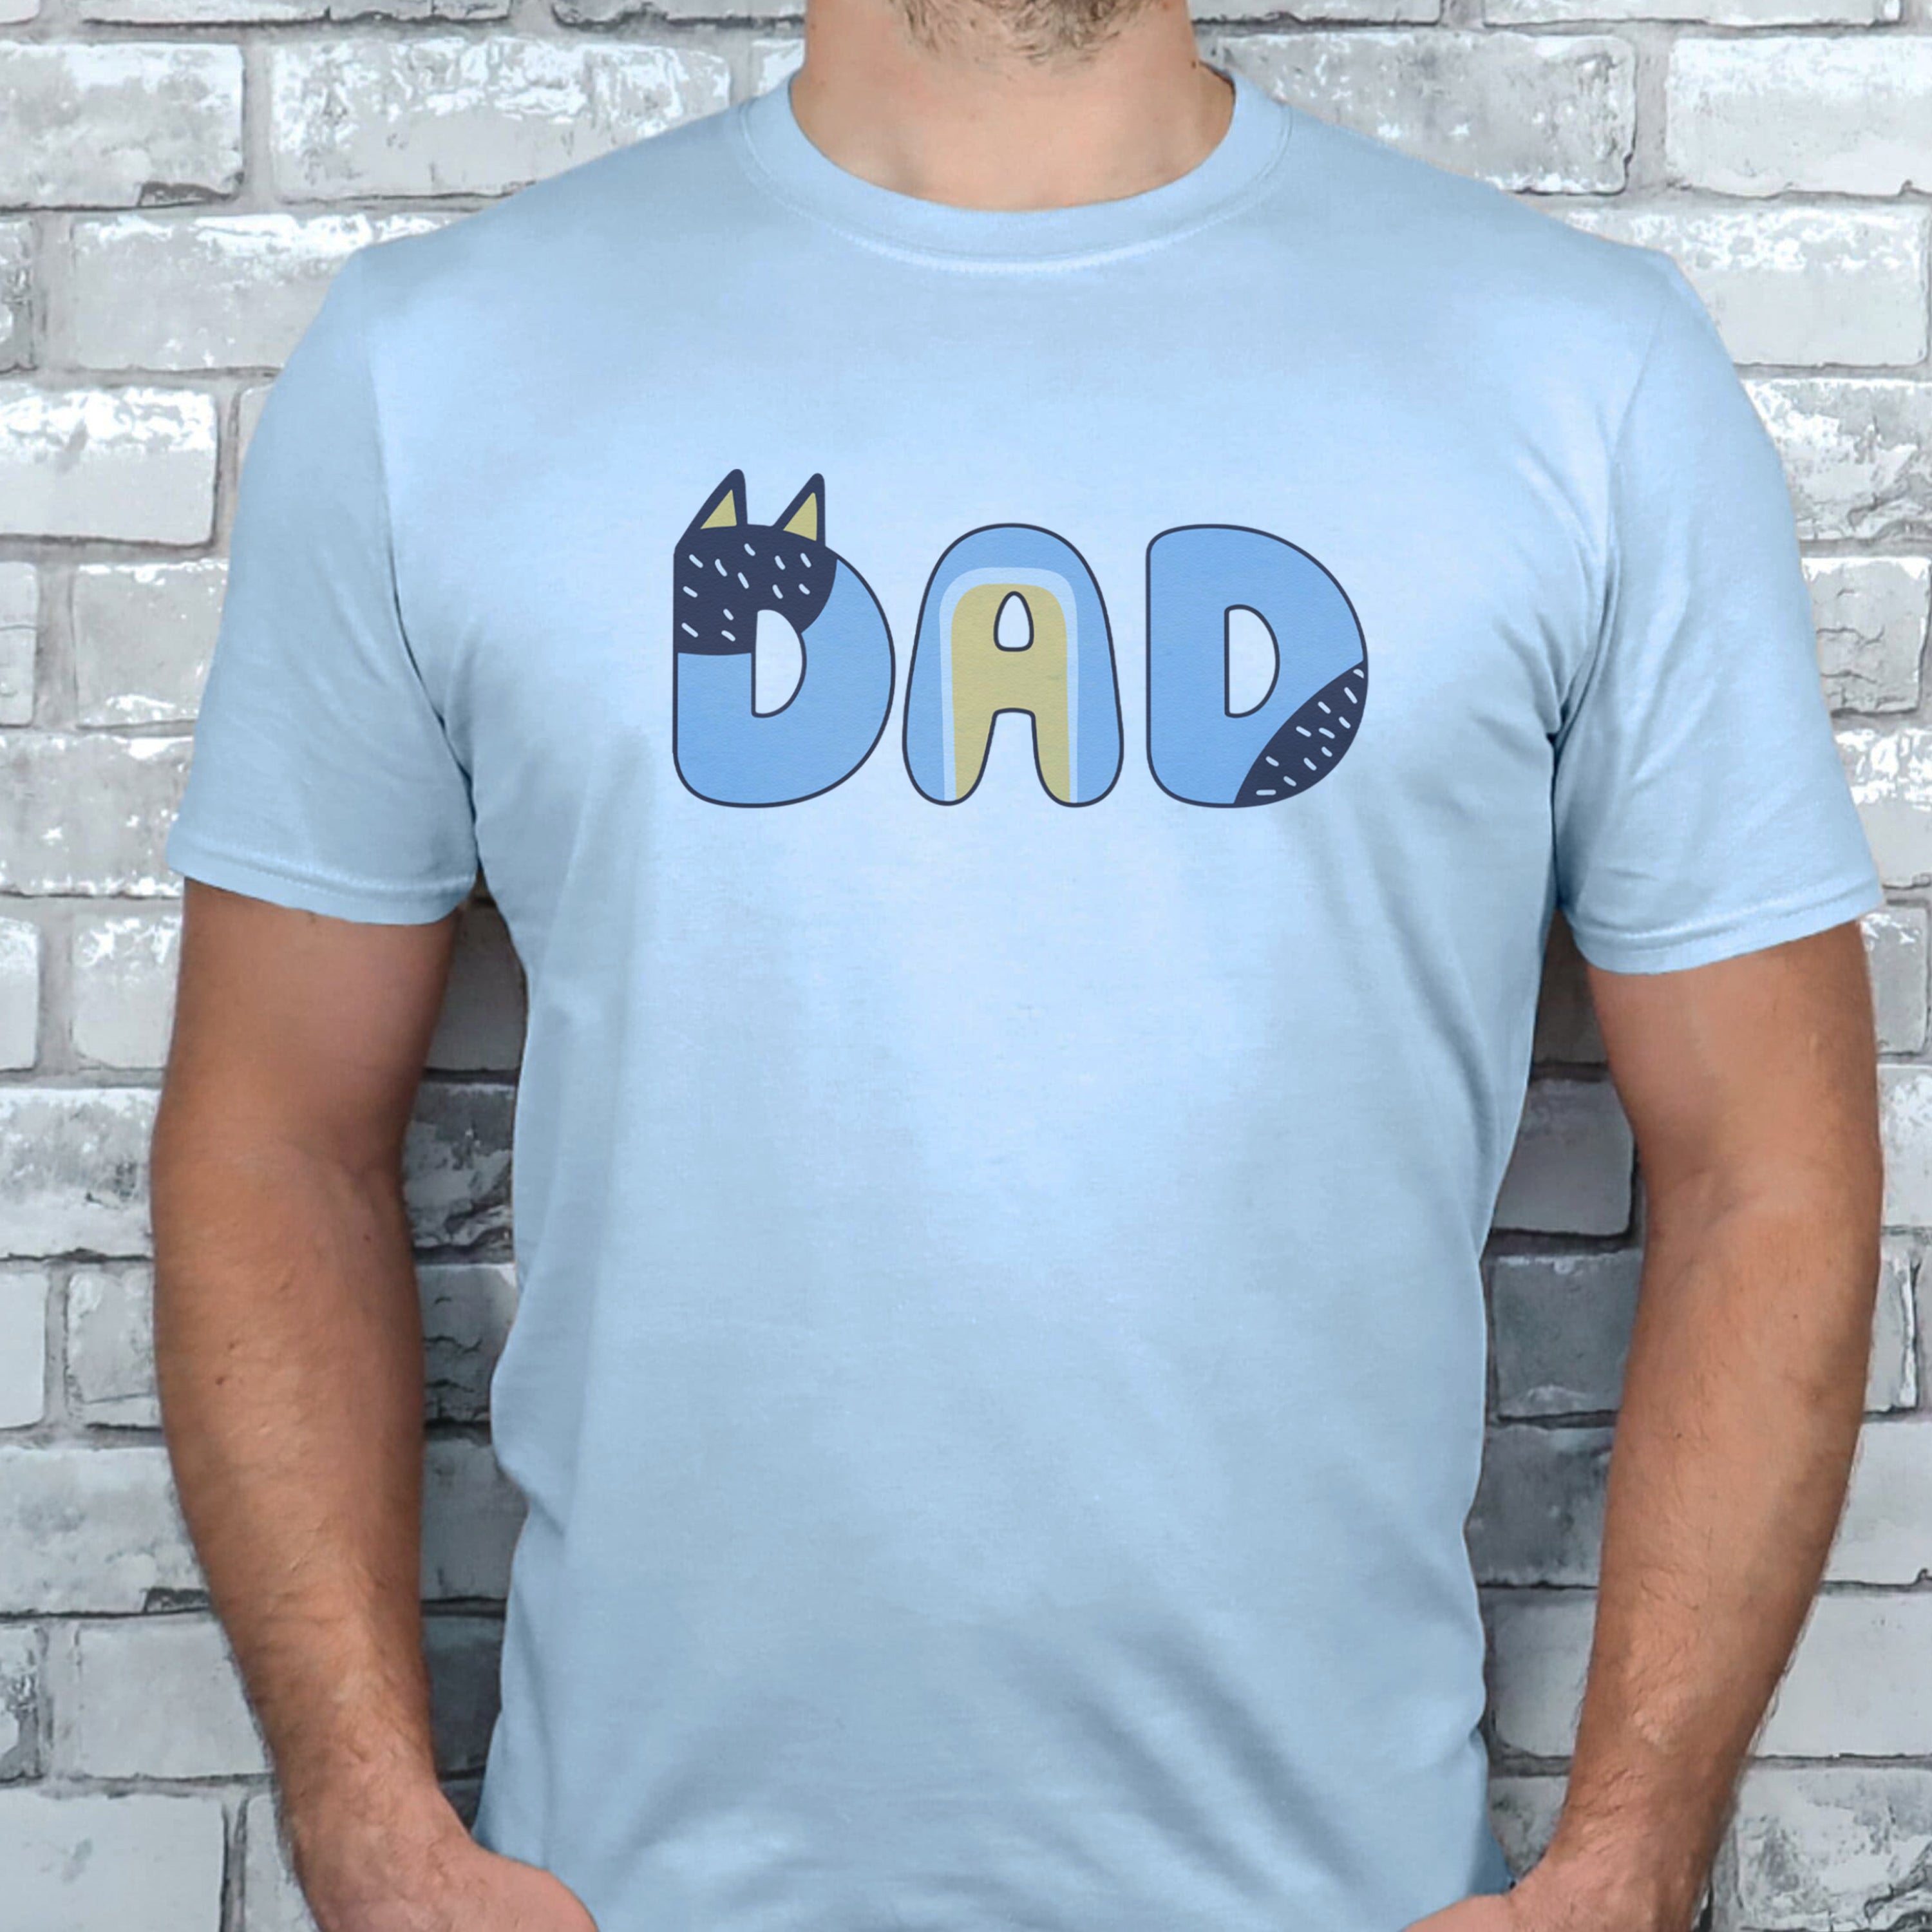 Bluey Inspired Aunt and Uncle, Birthday Family Shirts